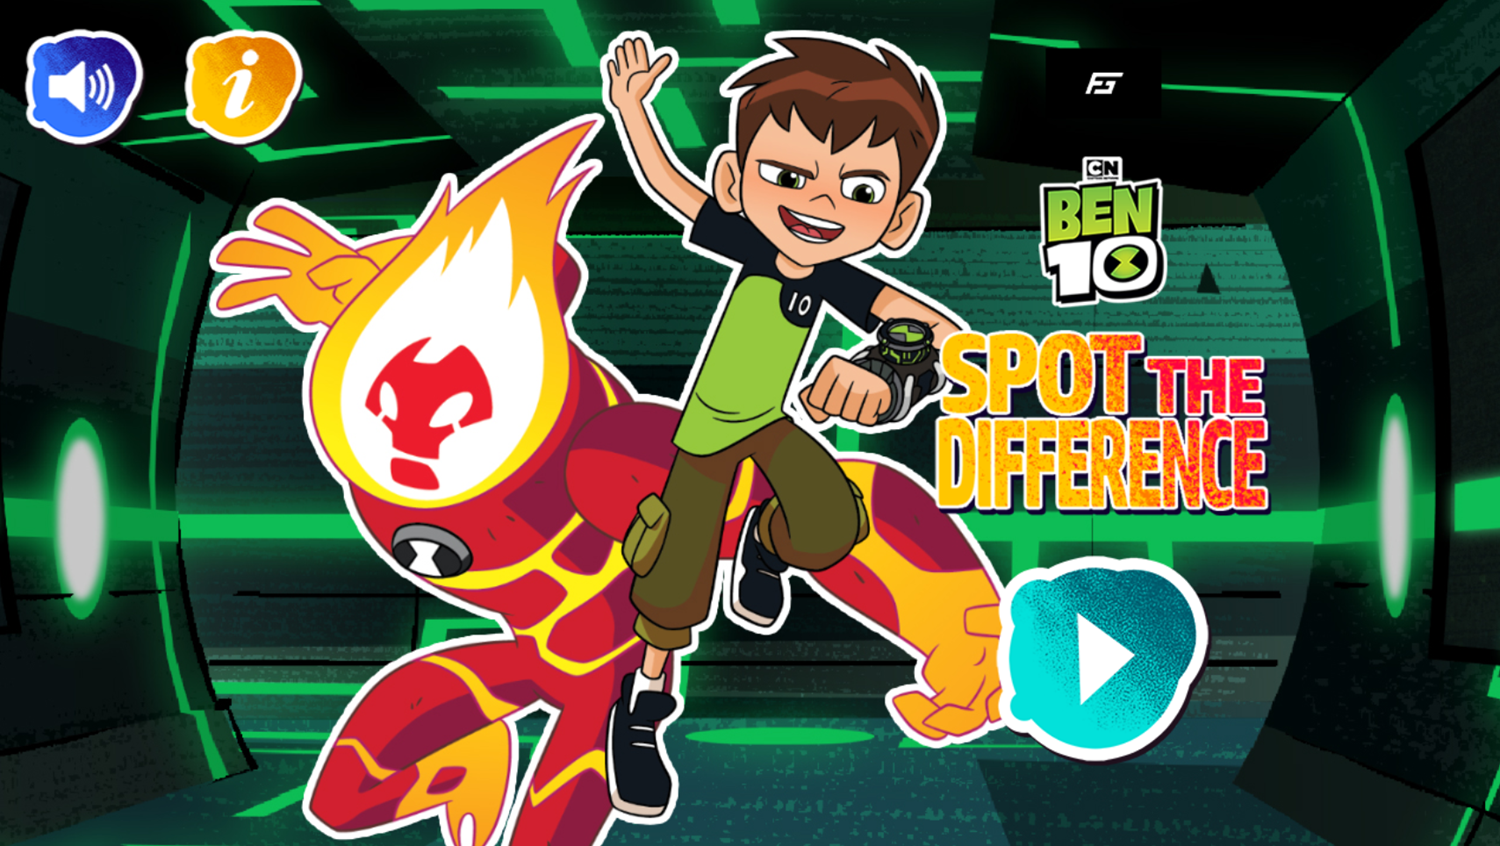 Ben 10 Spot the Difference Game Welcome Screen Screenshot.